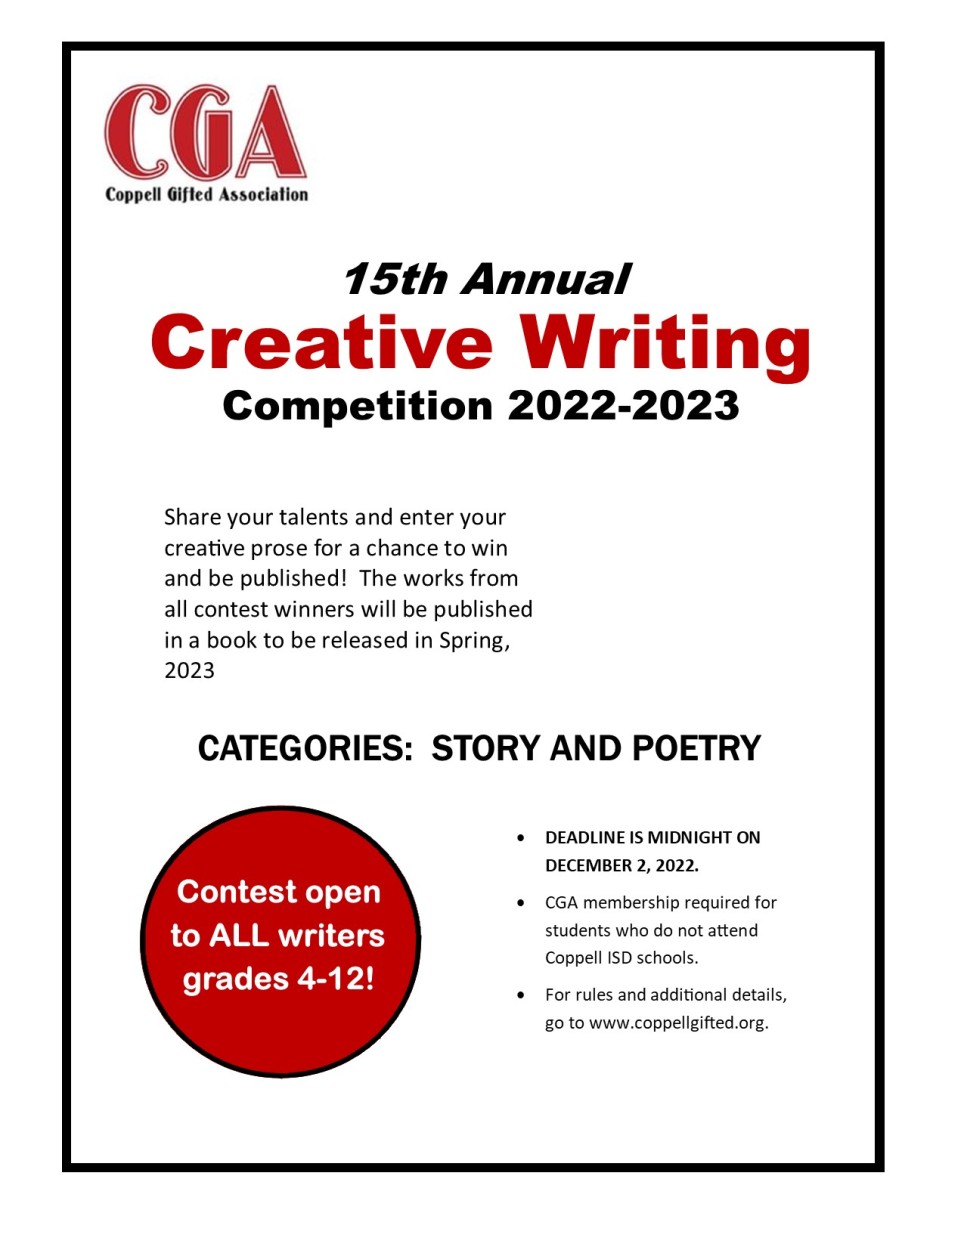 sacee creative writing competition 2023